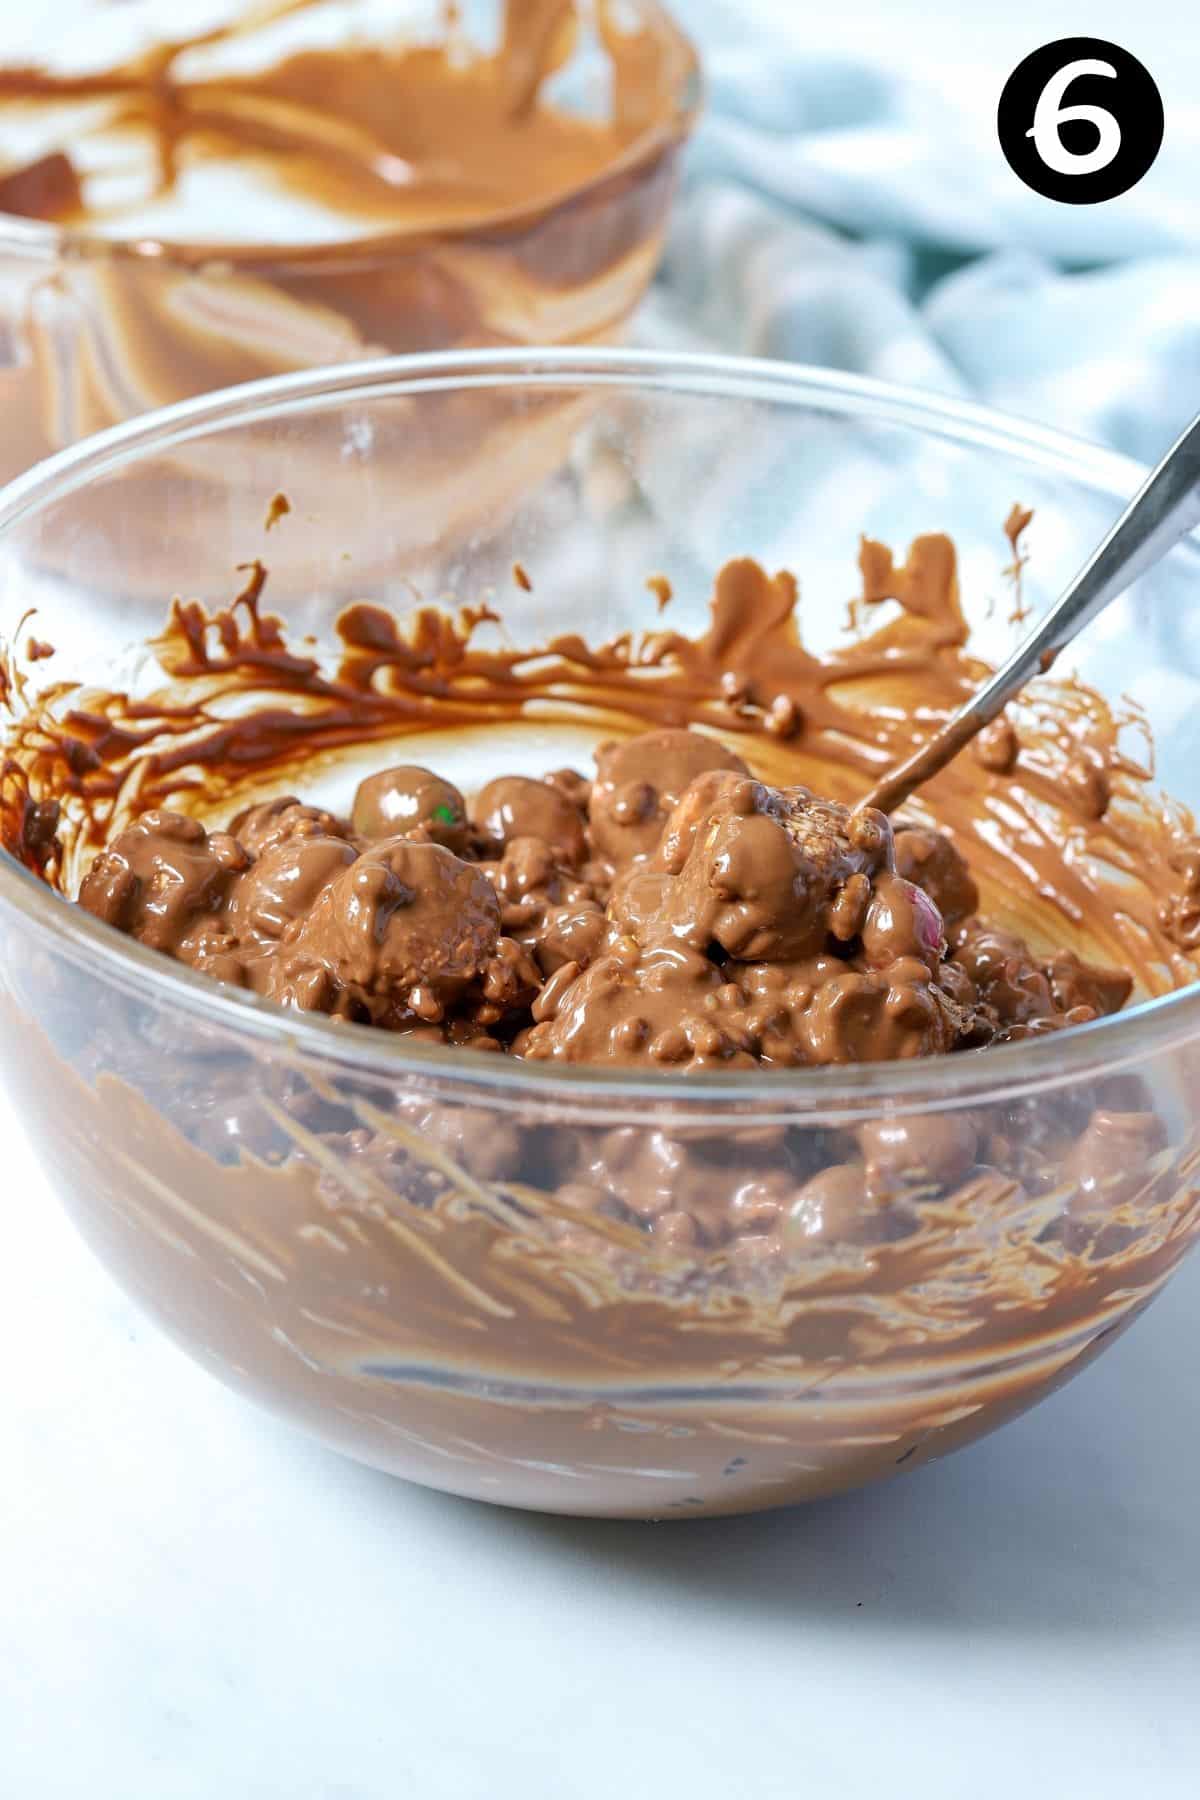 rocky road mixture in a glass bowl